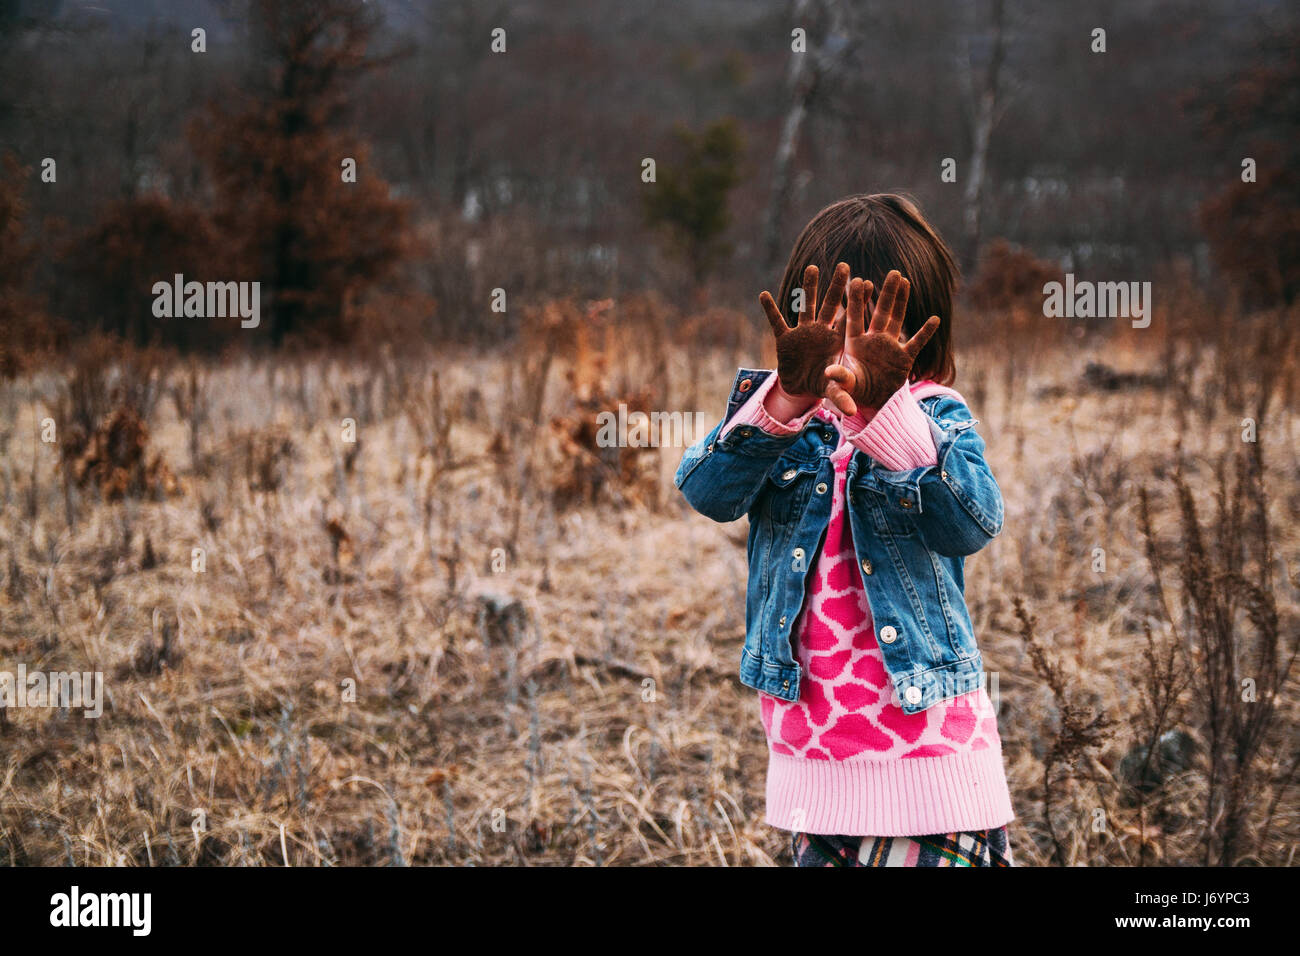 Girl standing in rural landscape holding dirty hands in front of her face Stock Photo